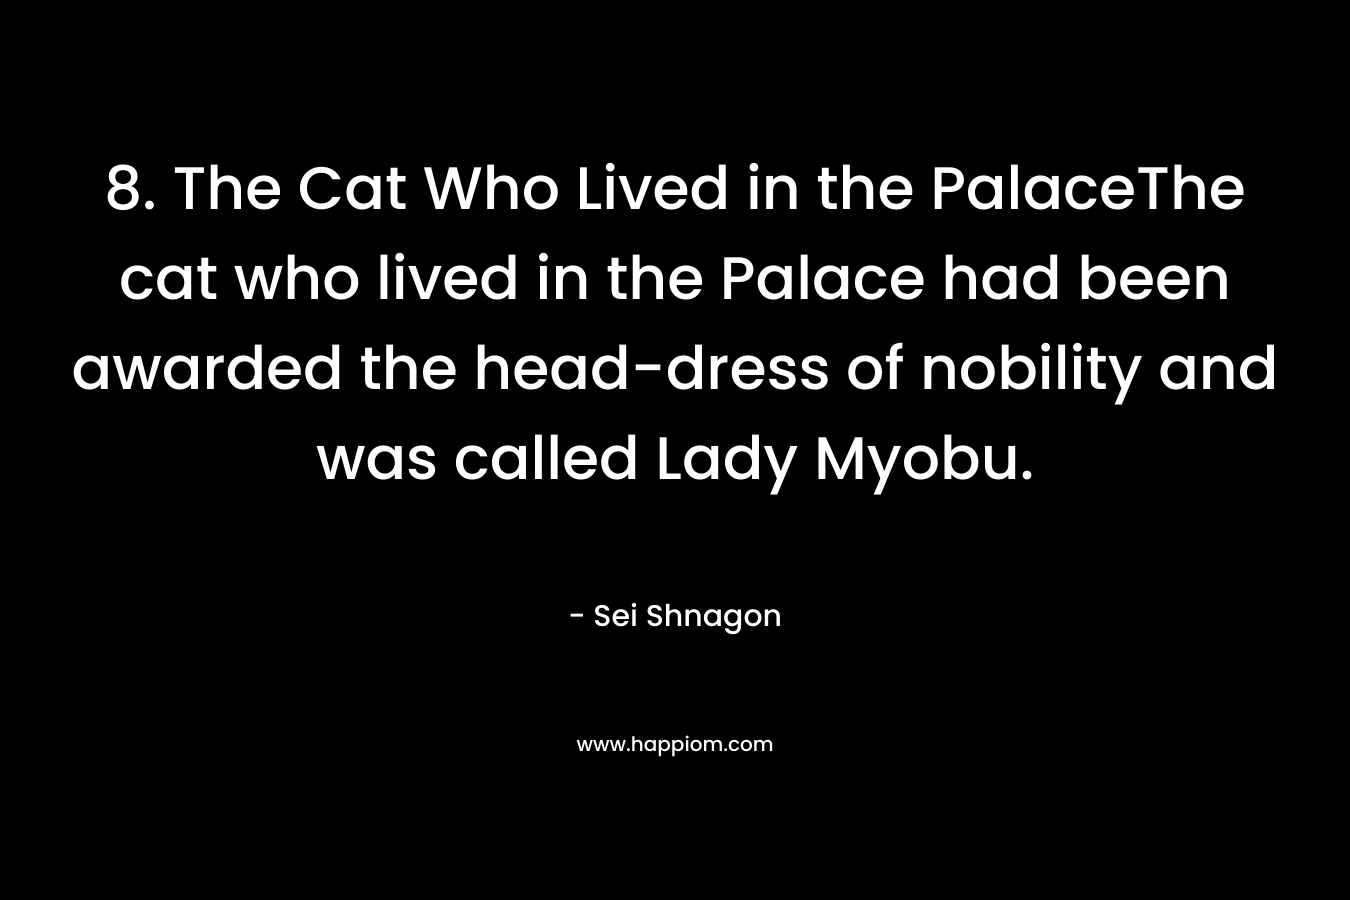 8. The Cat Who Lived in the PalaceThe cat who lived in the Palace had been awarded the head-dress of nobility and was called Lady Myobu. – Sei Shnagon